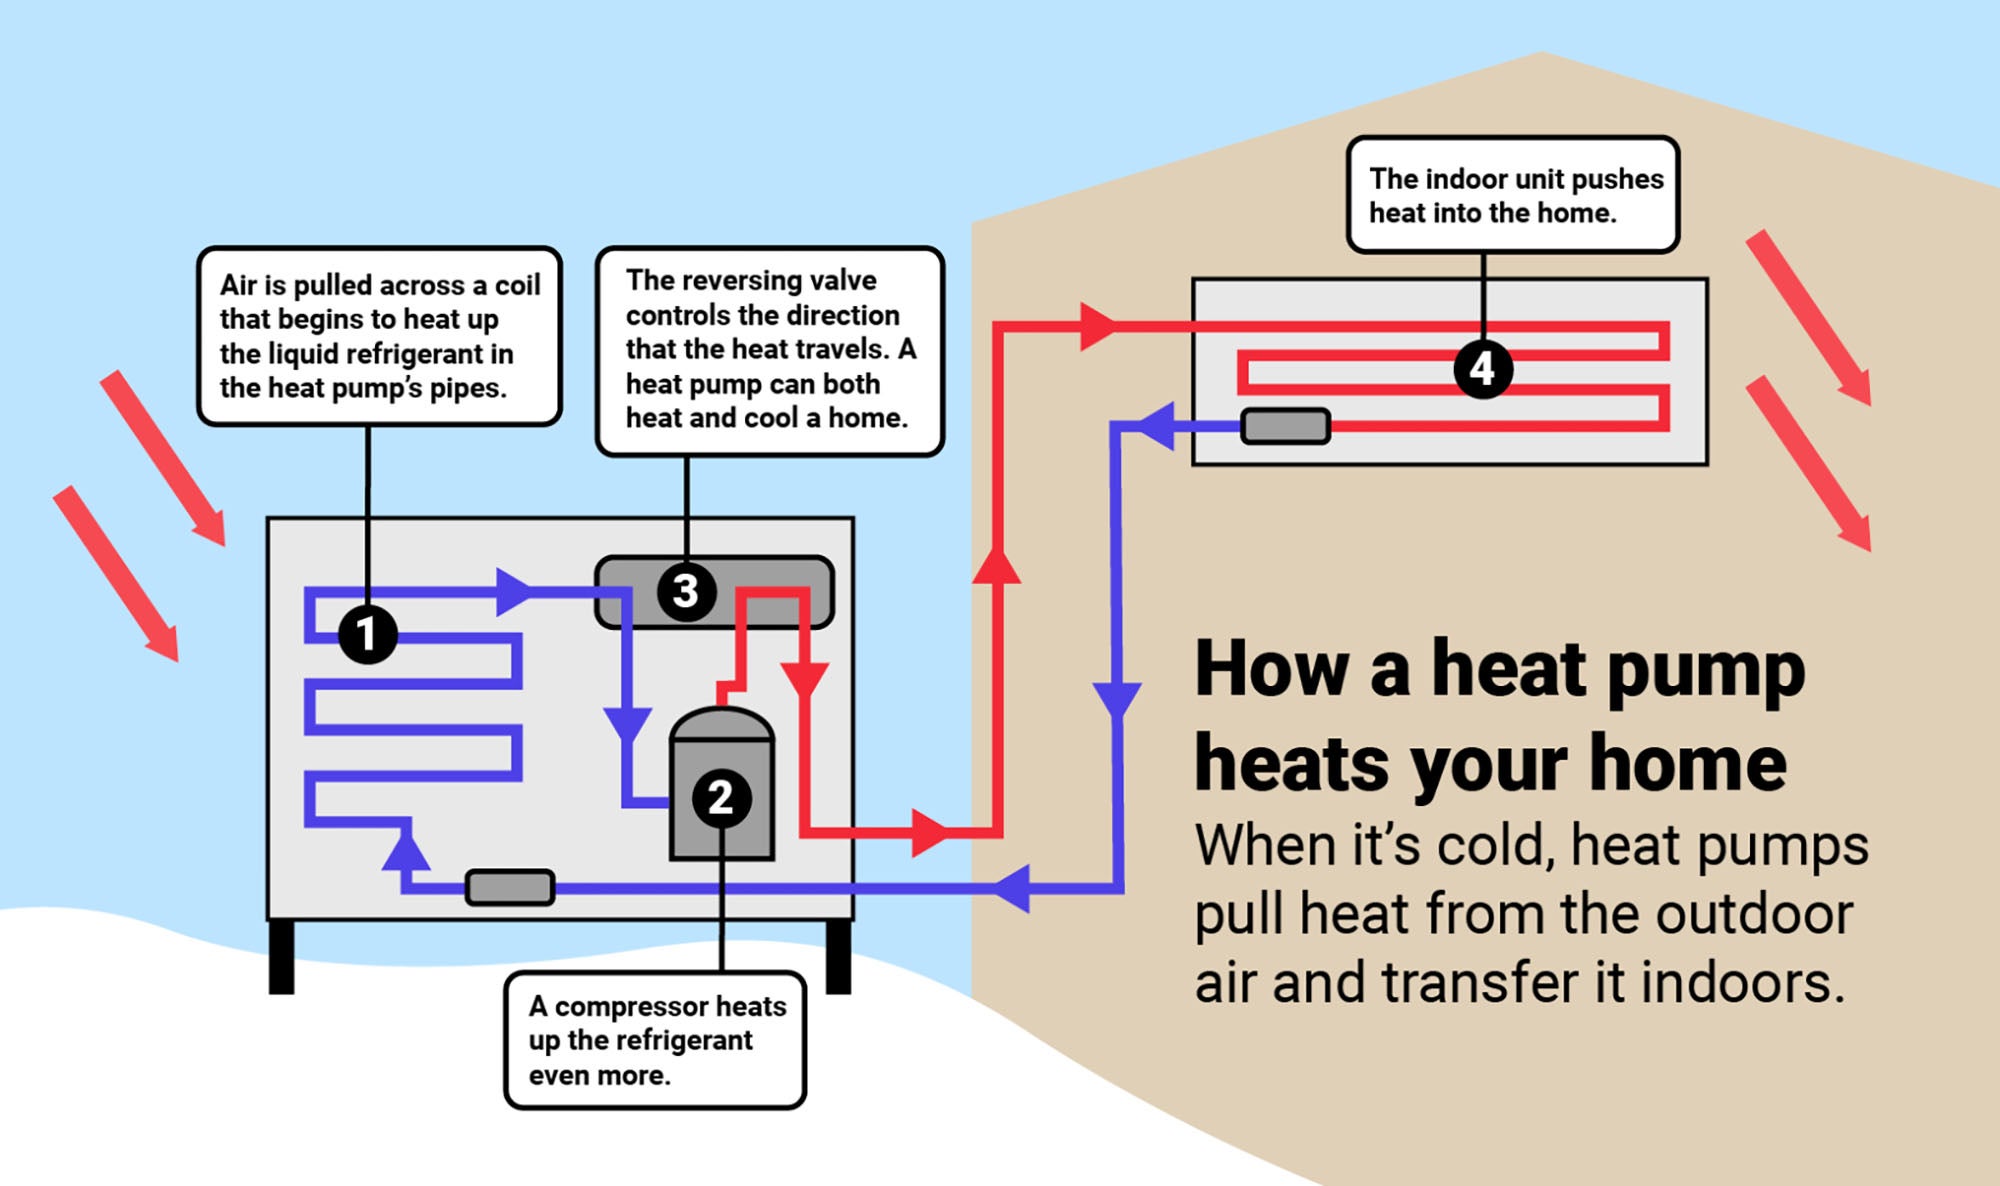 An illustration about how a heat pump works